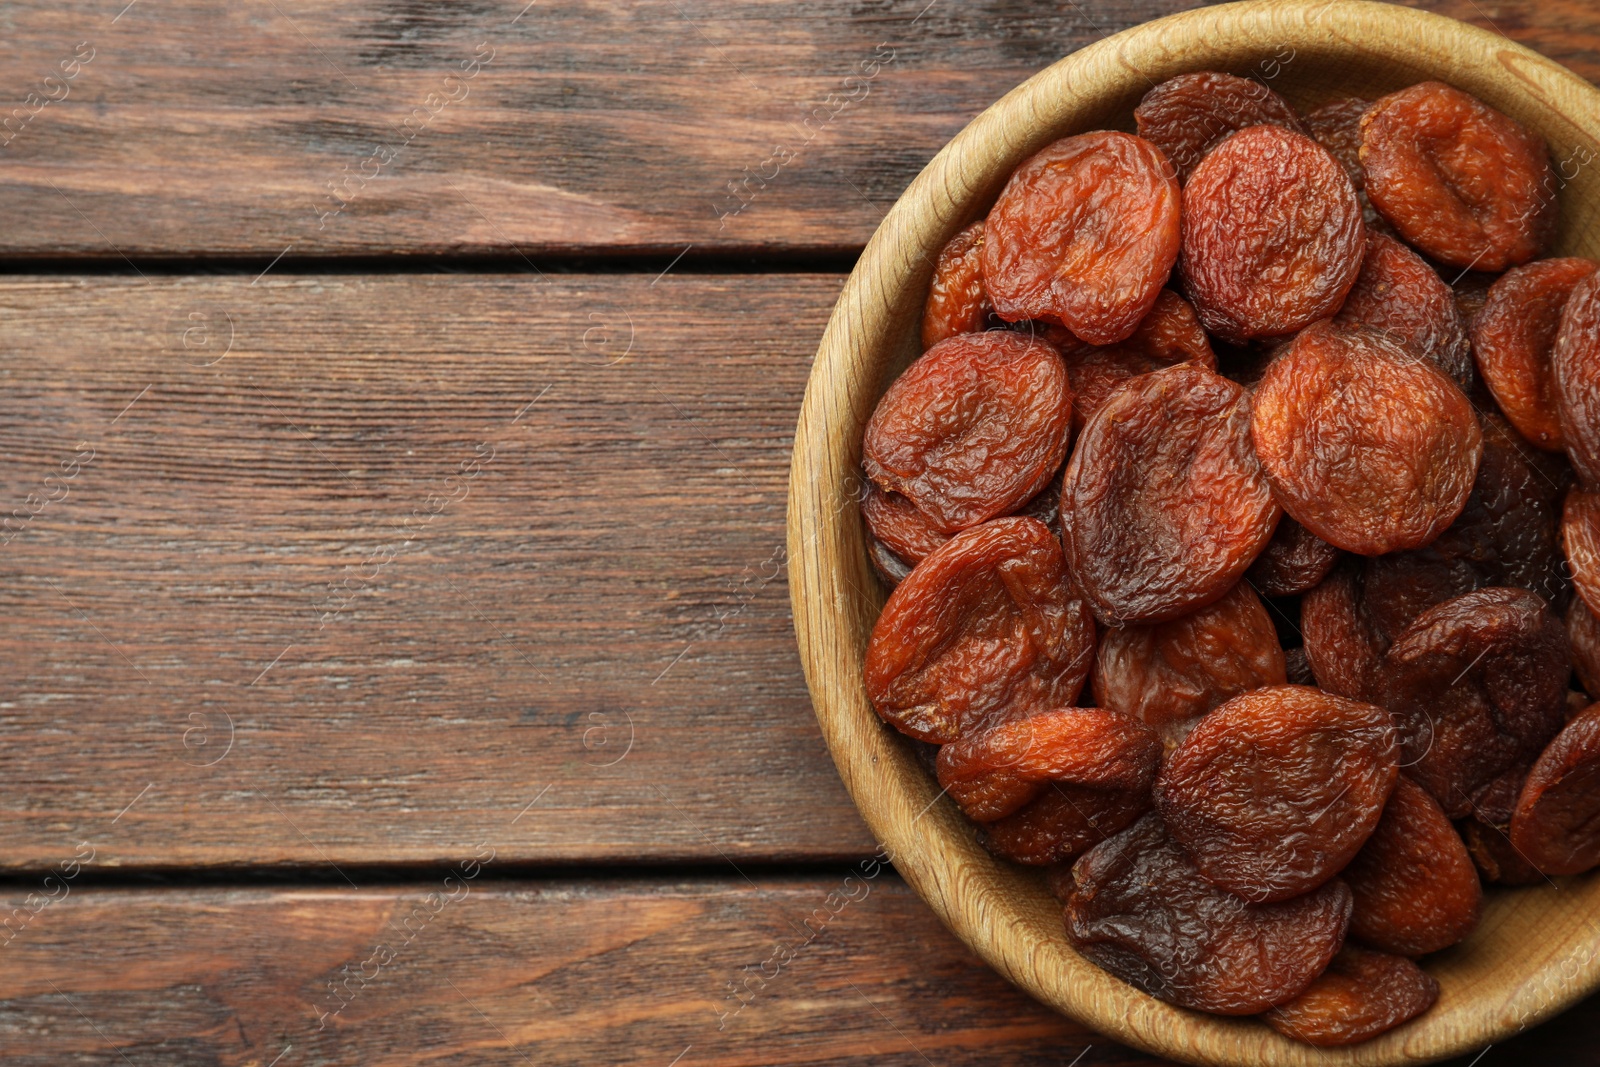 Photo of Bowl of tasty apricots on wooden table, top view and space for text. Dried fruits